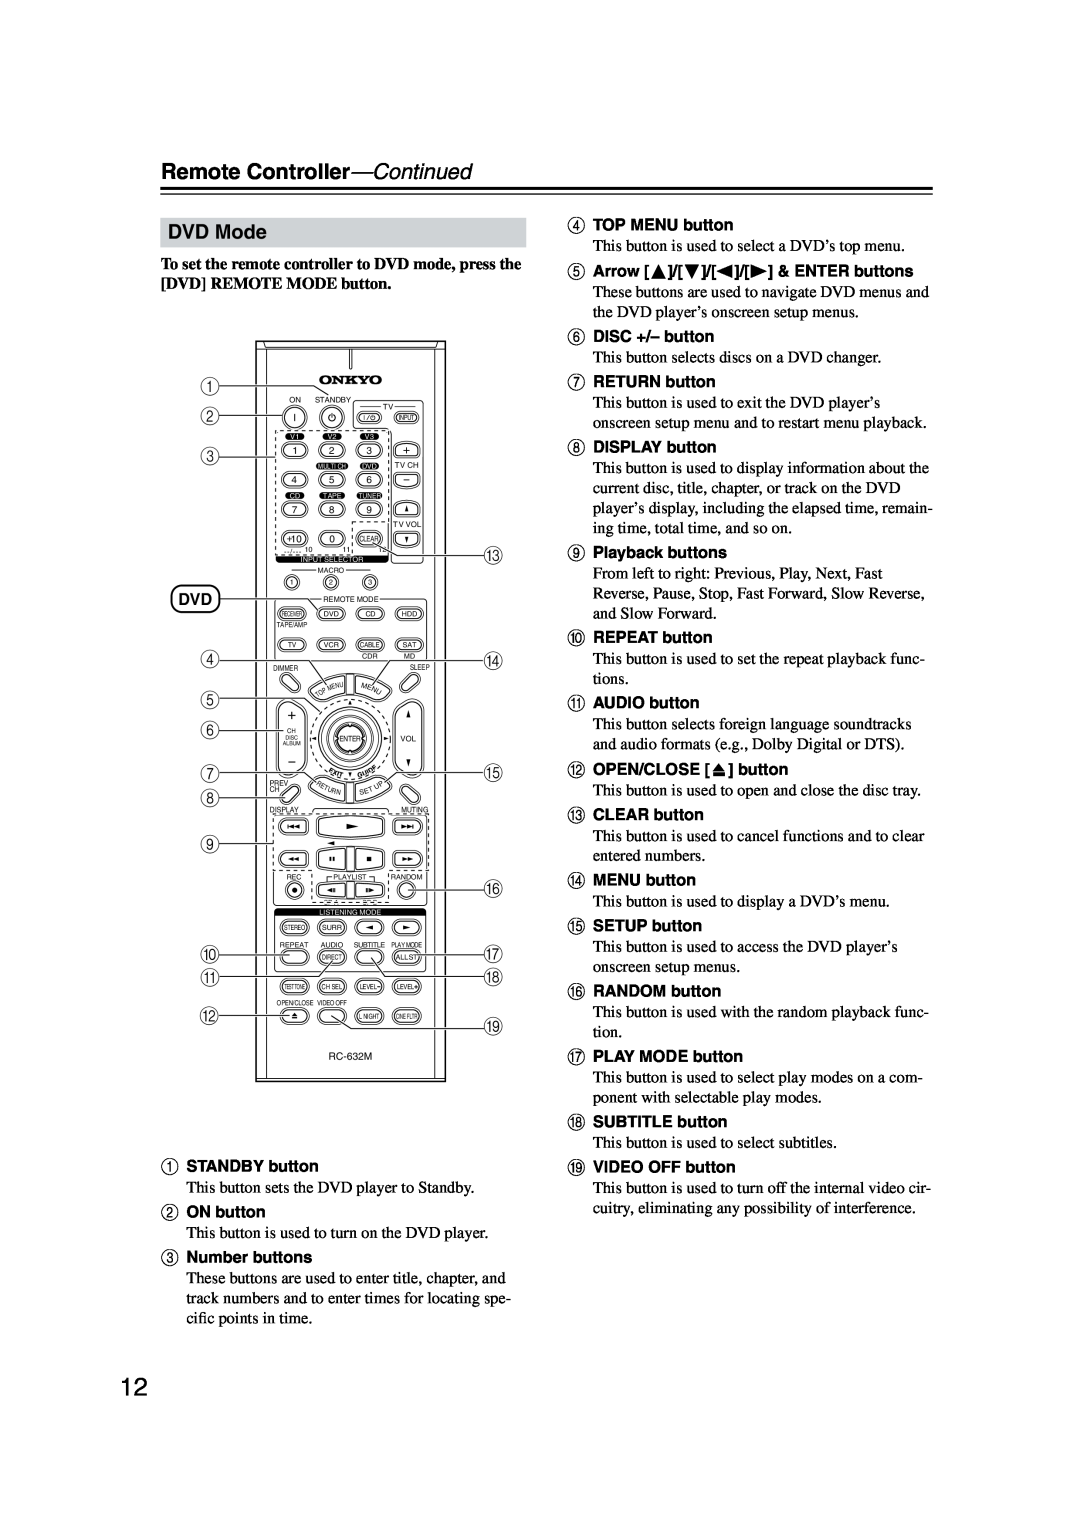 Onkyo TX-SR573 instruction manual DVD Mode, Remote Controller-Continued 